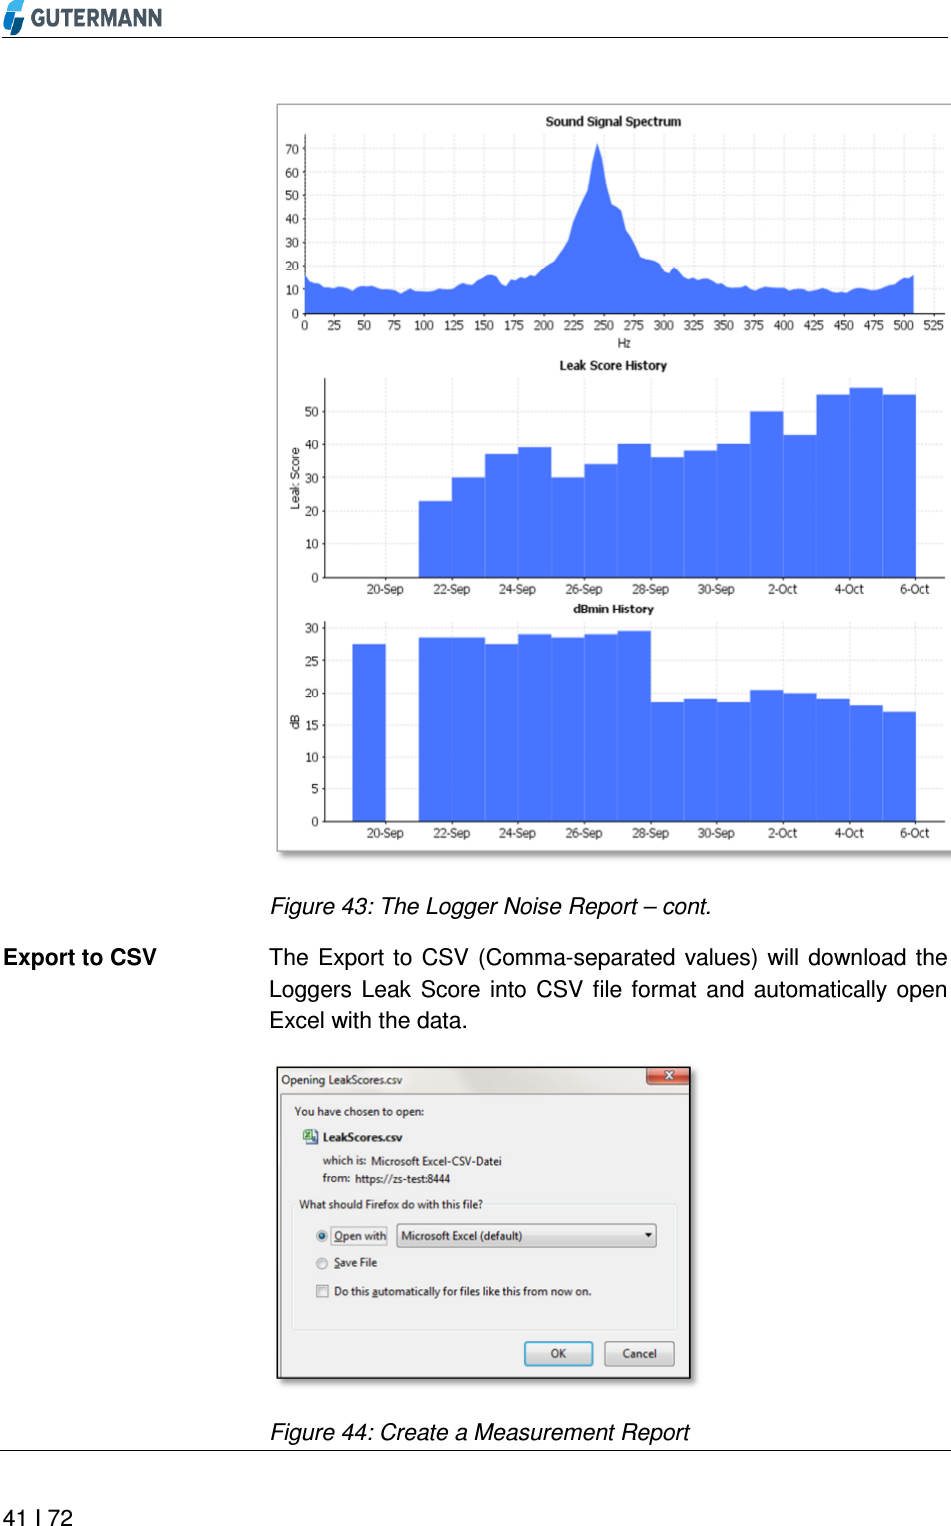       41 I 72   Figure 43: The Logger Noise Report – cont. The  Export to  CSV  (Comma-separated values) will  download  the Loggers  Leak  Score  into  CSV  file  format  and  automatically  open Excel with the data.  Figure 44: Create a Measurement Report Export to CSV 